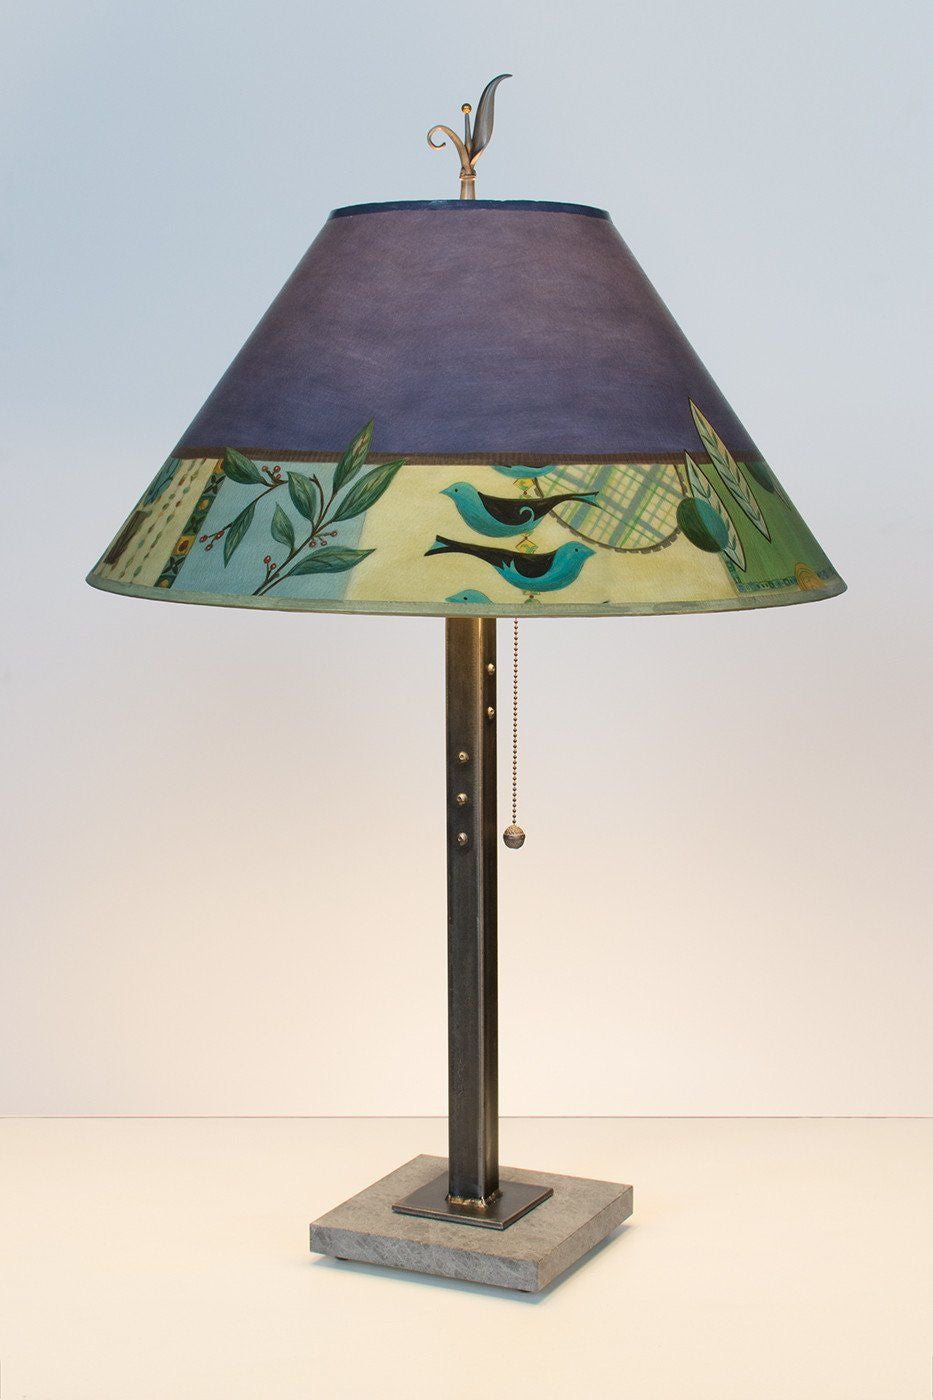 Janna Ugone &amp; Co Table Lamps Steel Table Lamp Large Conical Shade in New Capri Periwinkle